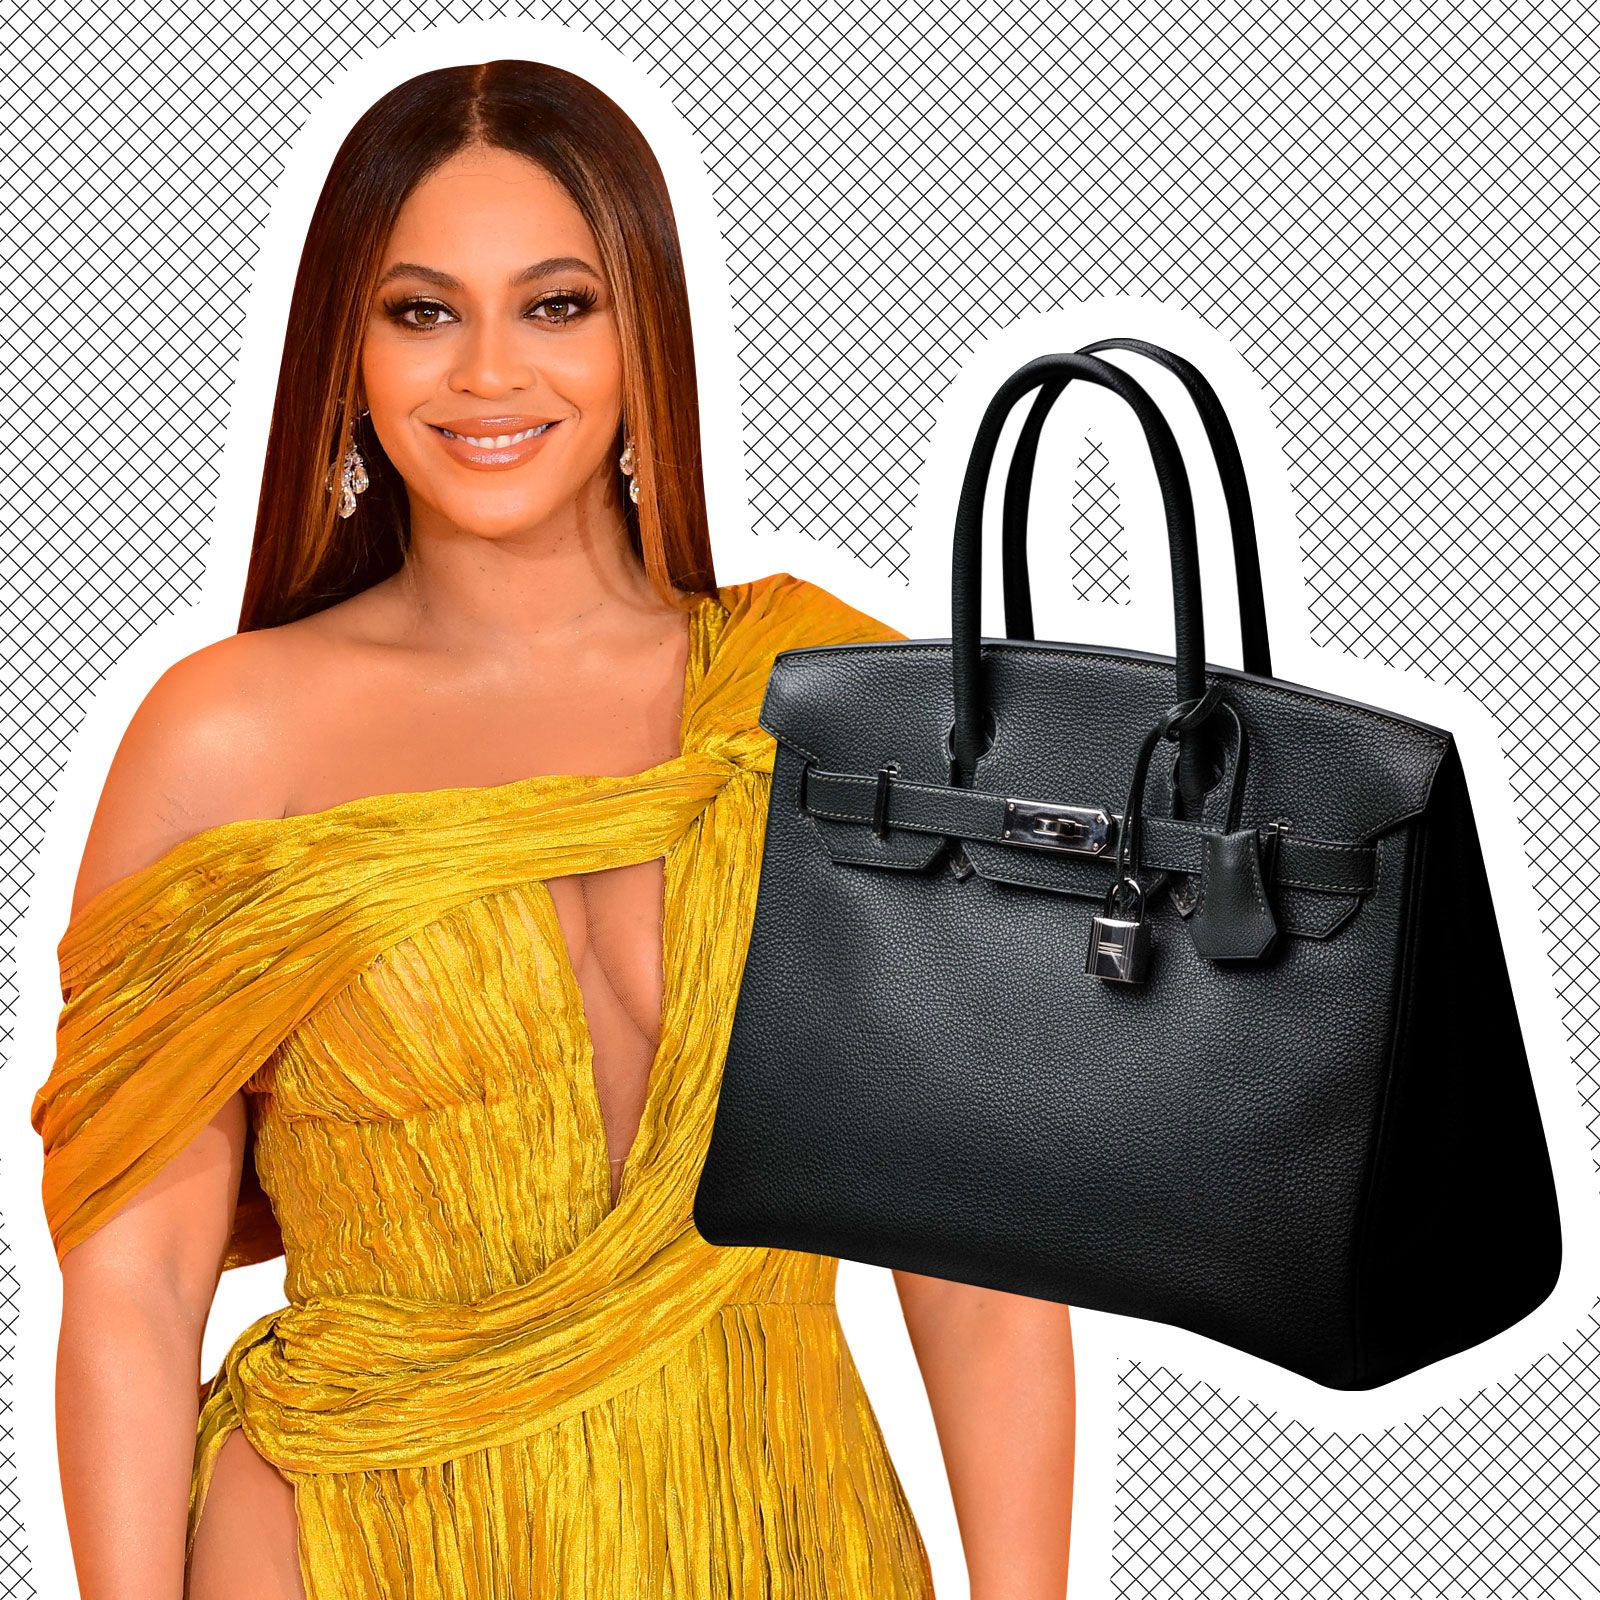 The Best Hermes Birkin Inspired Bags (From $25!)  Hermes bag birkin, Birkin  bag, Inspired handbags